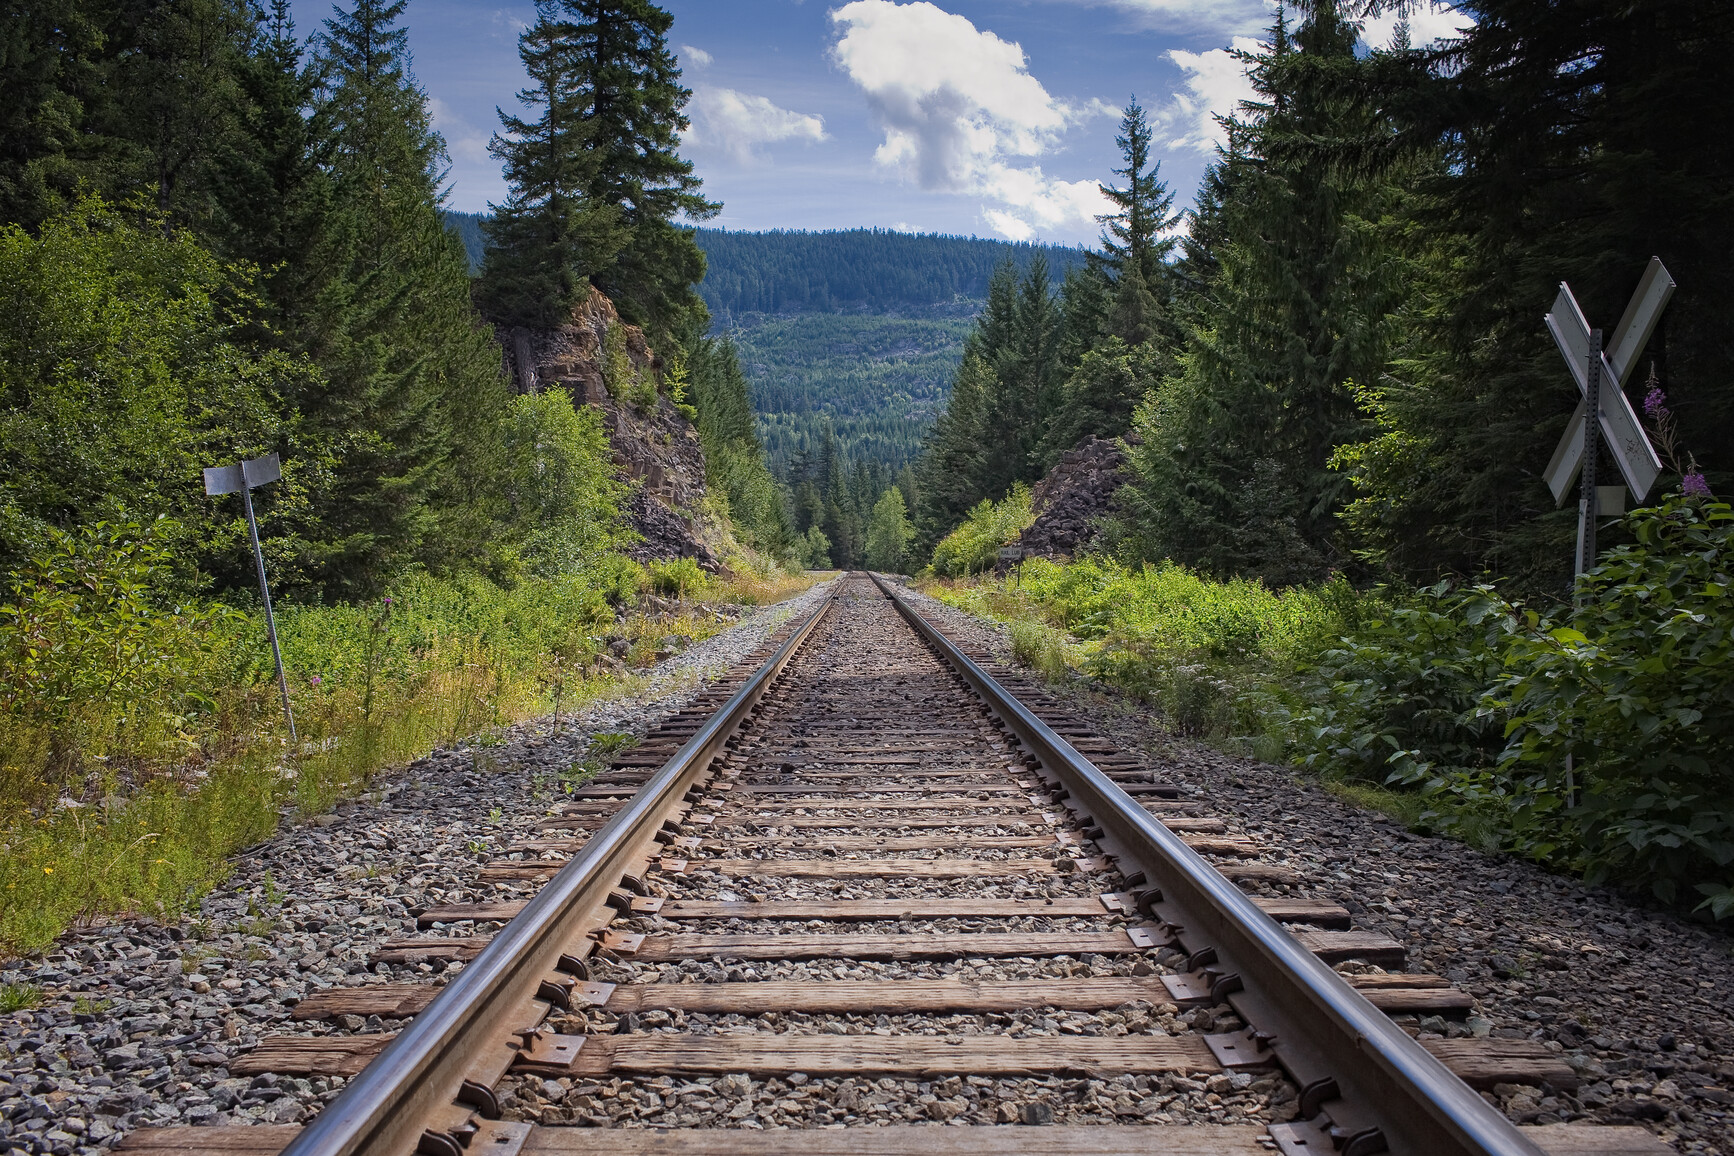 Rail tracks running through the forest. In the background forest covered mountains.